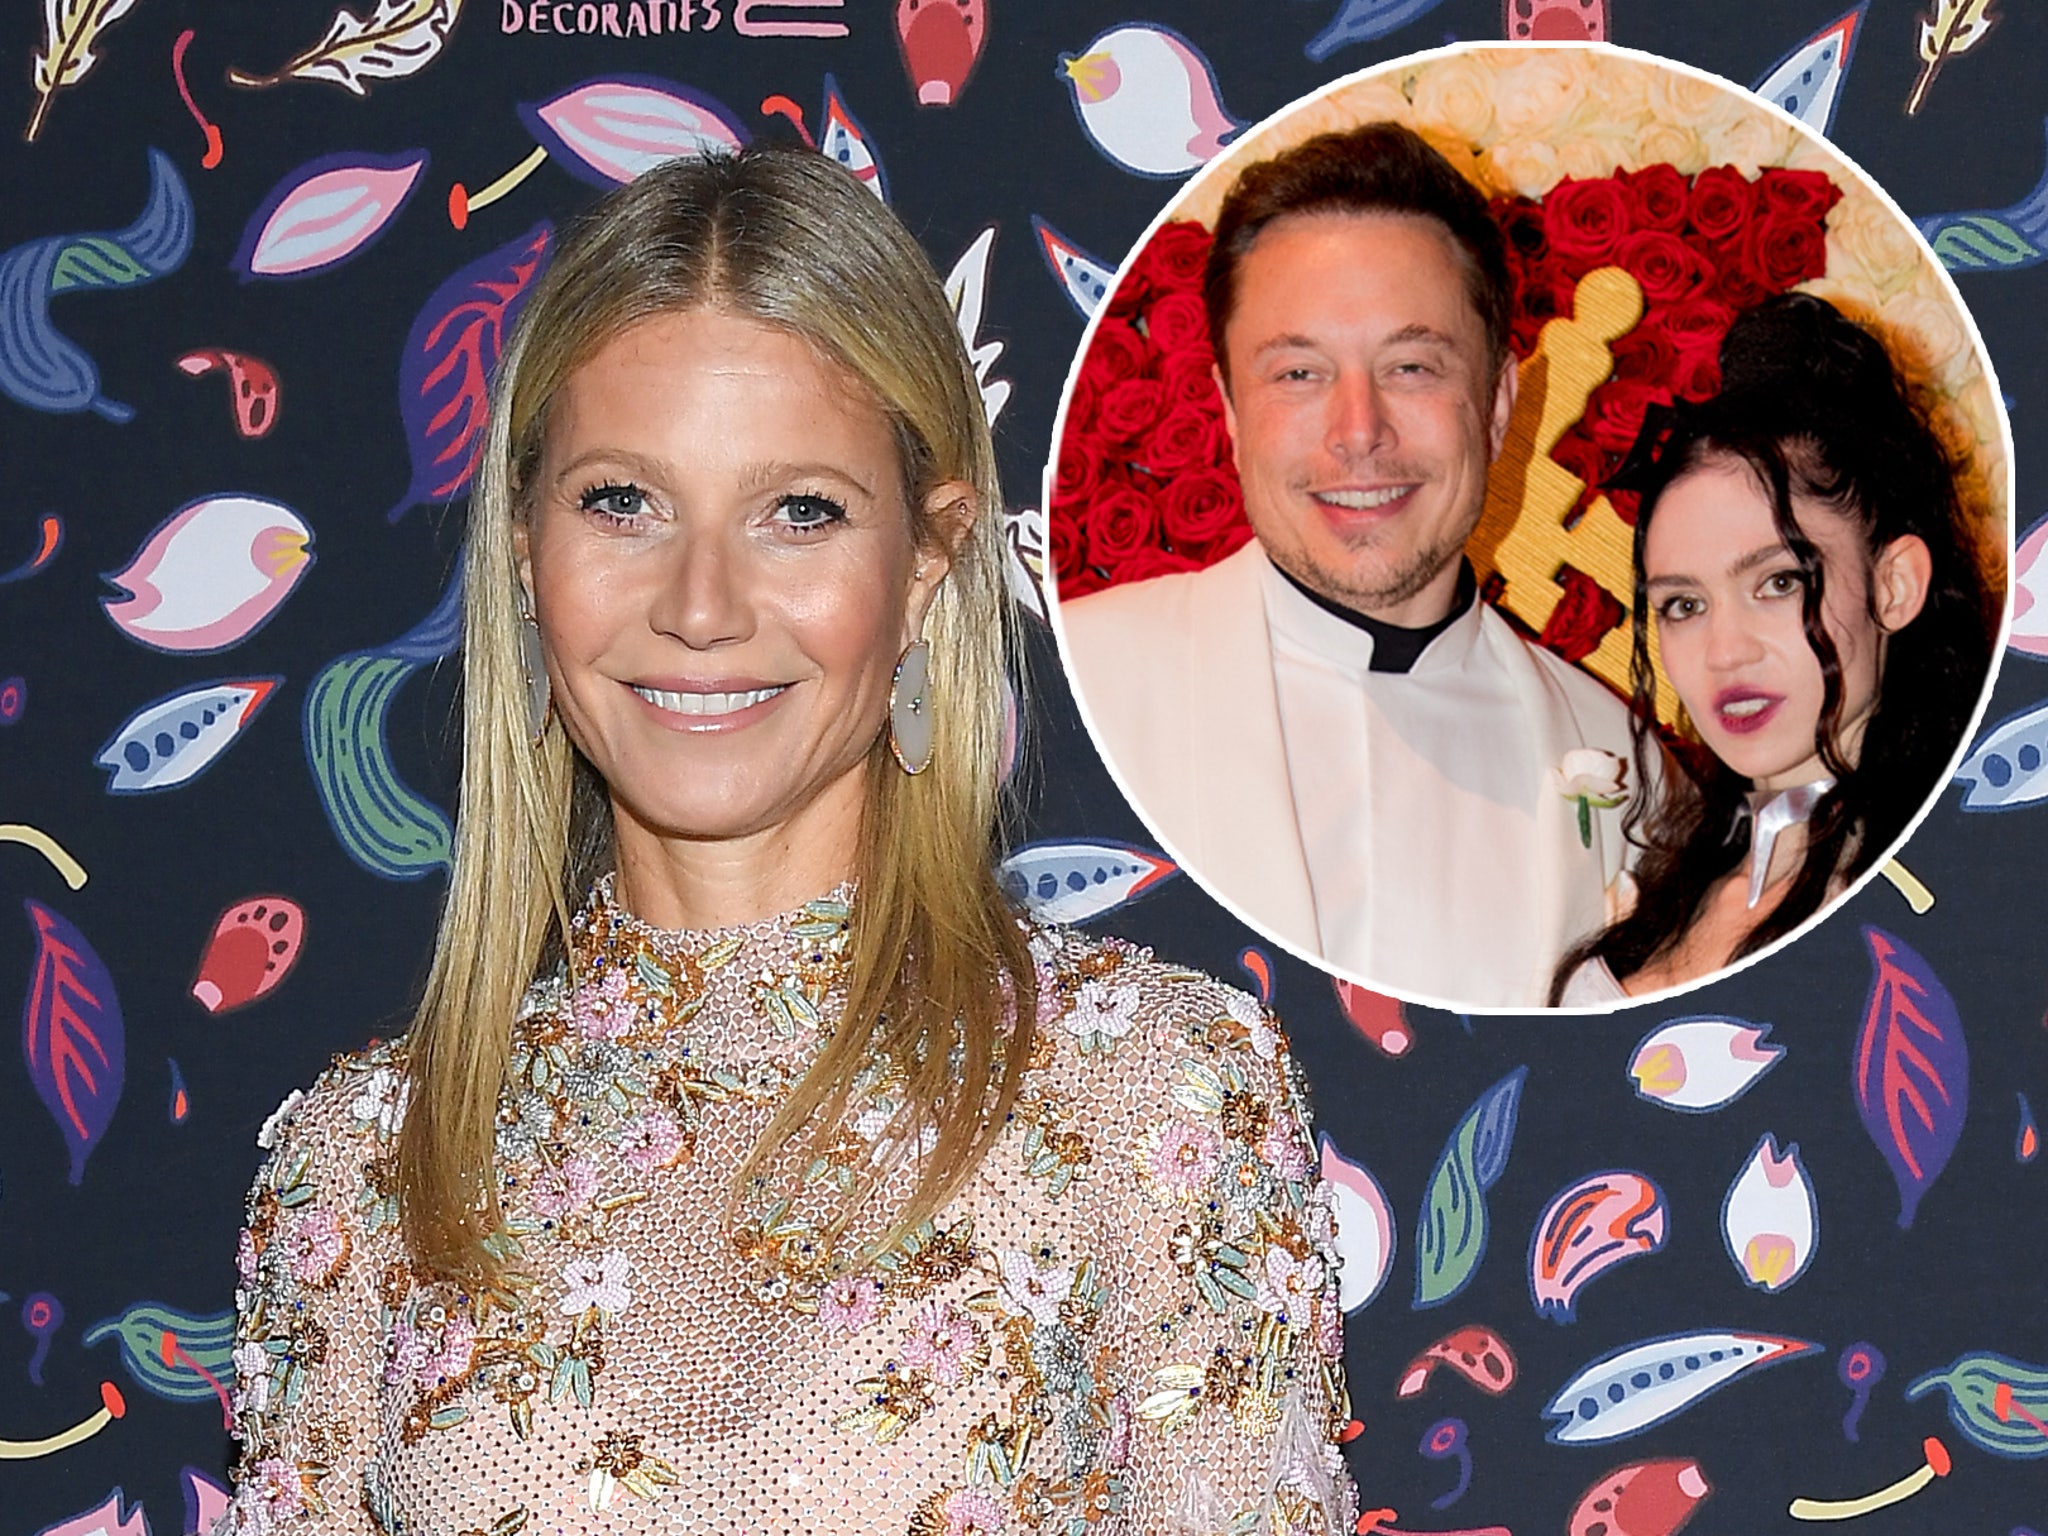 Gwyneth Paltrow Concedes Most Controversial Baby Name To Elon Musk And Grimes